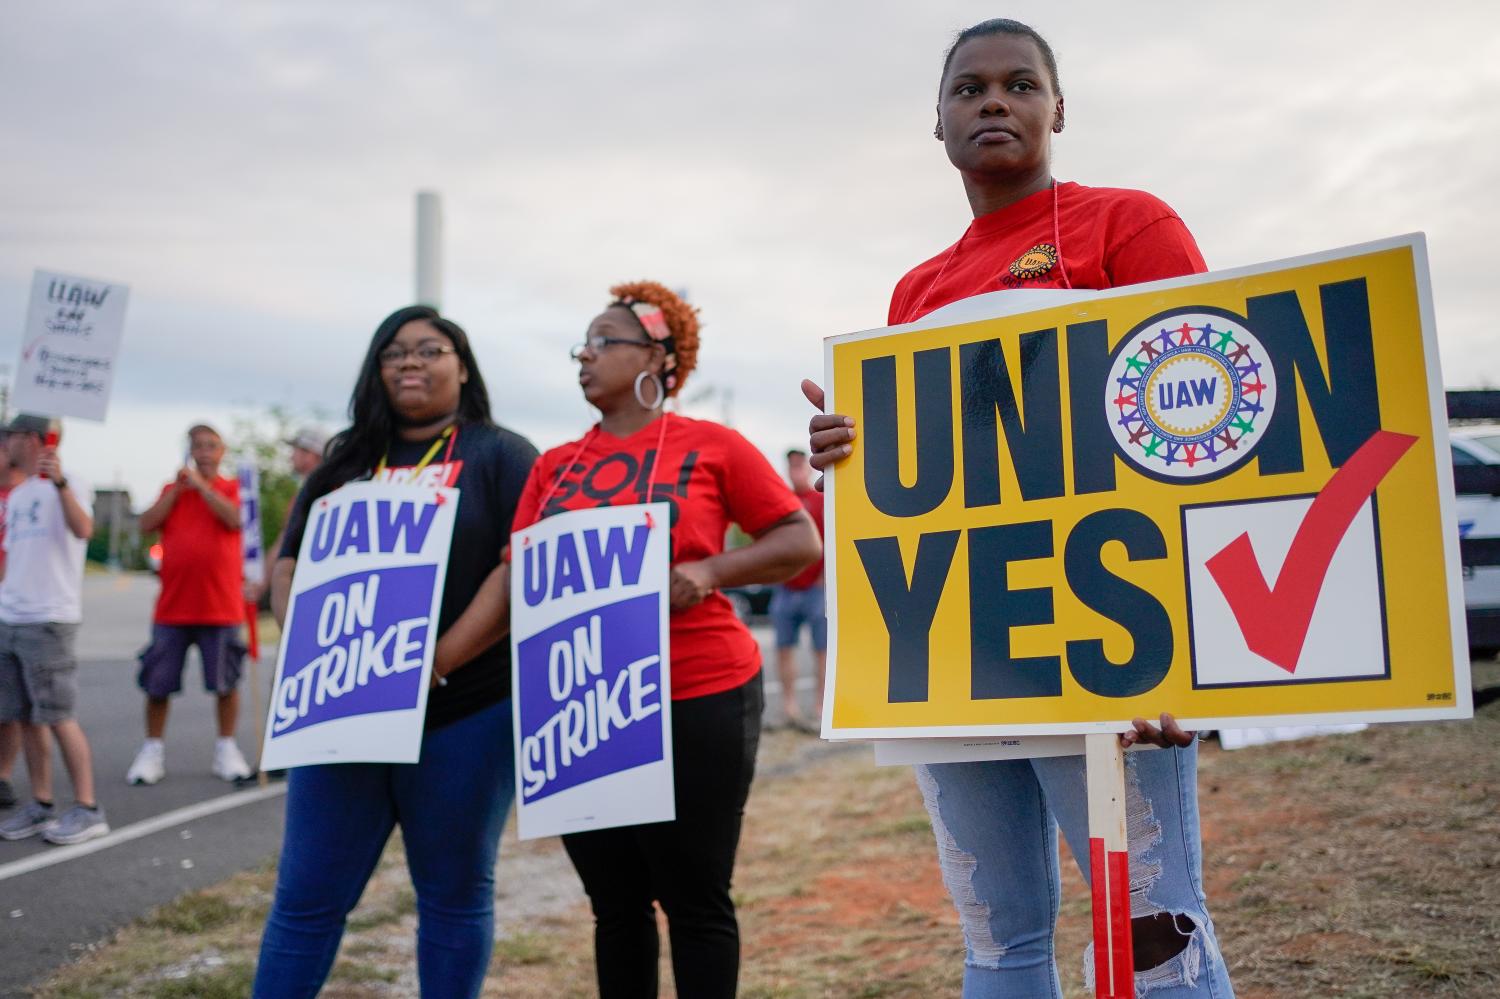 General Motors assembly workers and their supporters gather to picket outside the General Motors Bowling Green plant during the United Auto Workers (UAW) national strike in Bowling Green, Kentucky, U.S., September 20, 2019.  REUTERS/Bryan Woolston - RC122F87C370